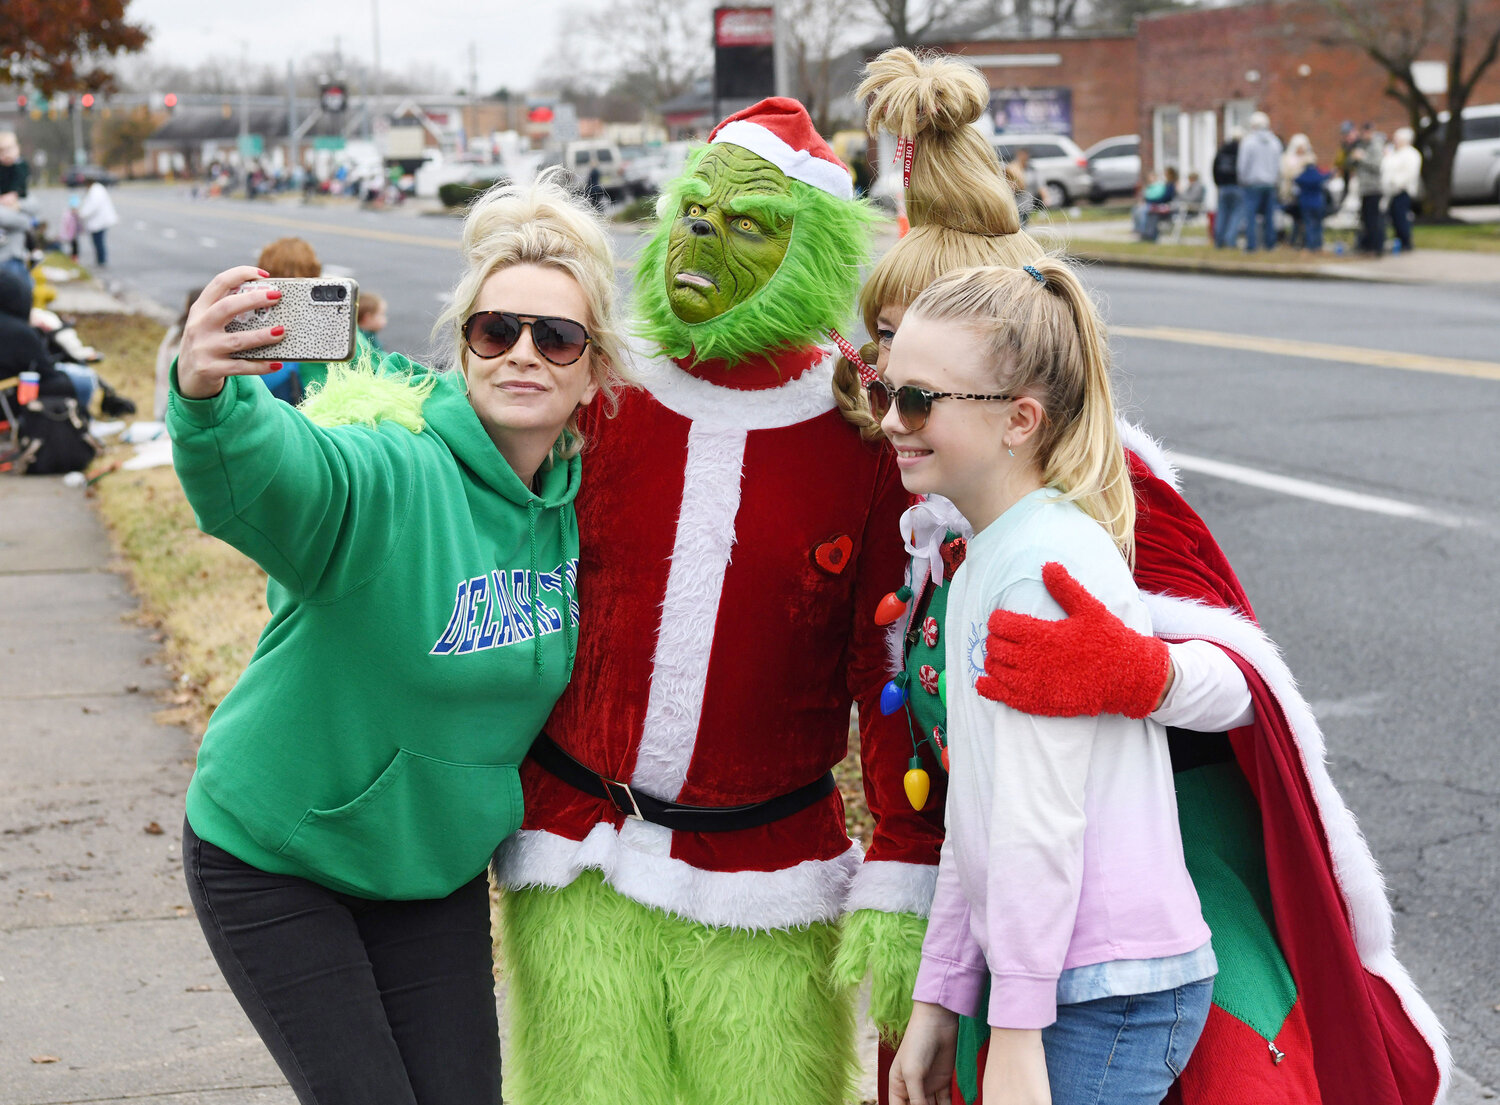 Jenny Hoffman, left, of Laurel takes a selfie with the Grinch and Cindy Lou Who with her daughter, Danica Banks, 11, also of Laurel.